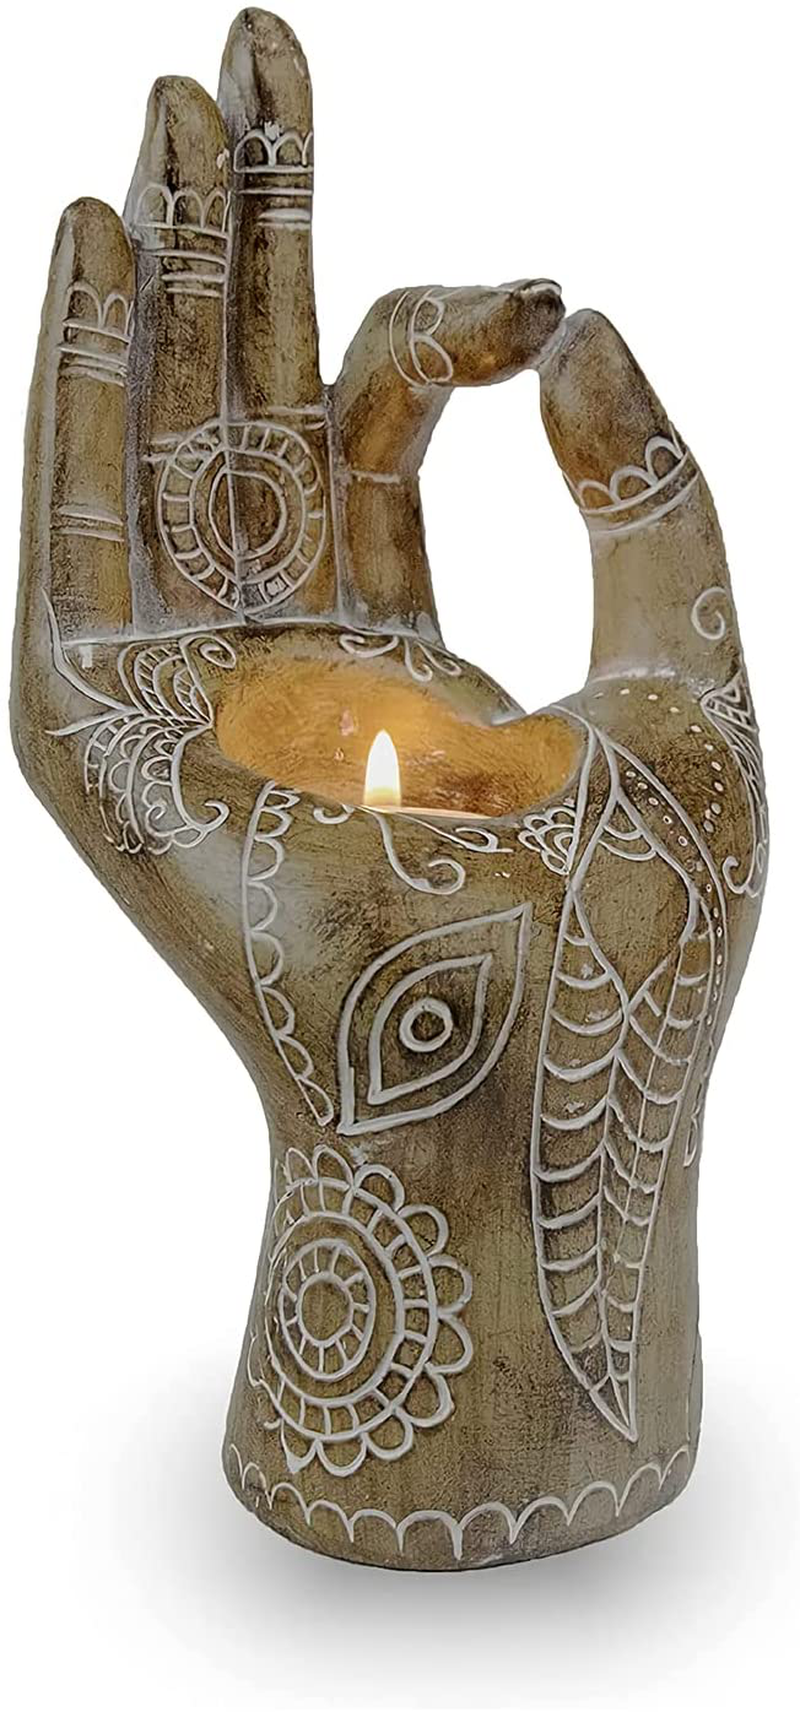 FLJZCZM Meditation Decor - Buddha Candle Holder Mudra Hand Decor Statues Home Office Collectible Figurines ，Resin Retro Small Tealight Lights for Meditation Relaxing Gift (Wooden)